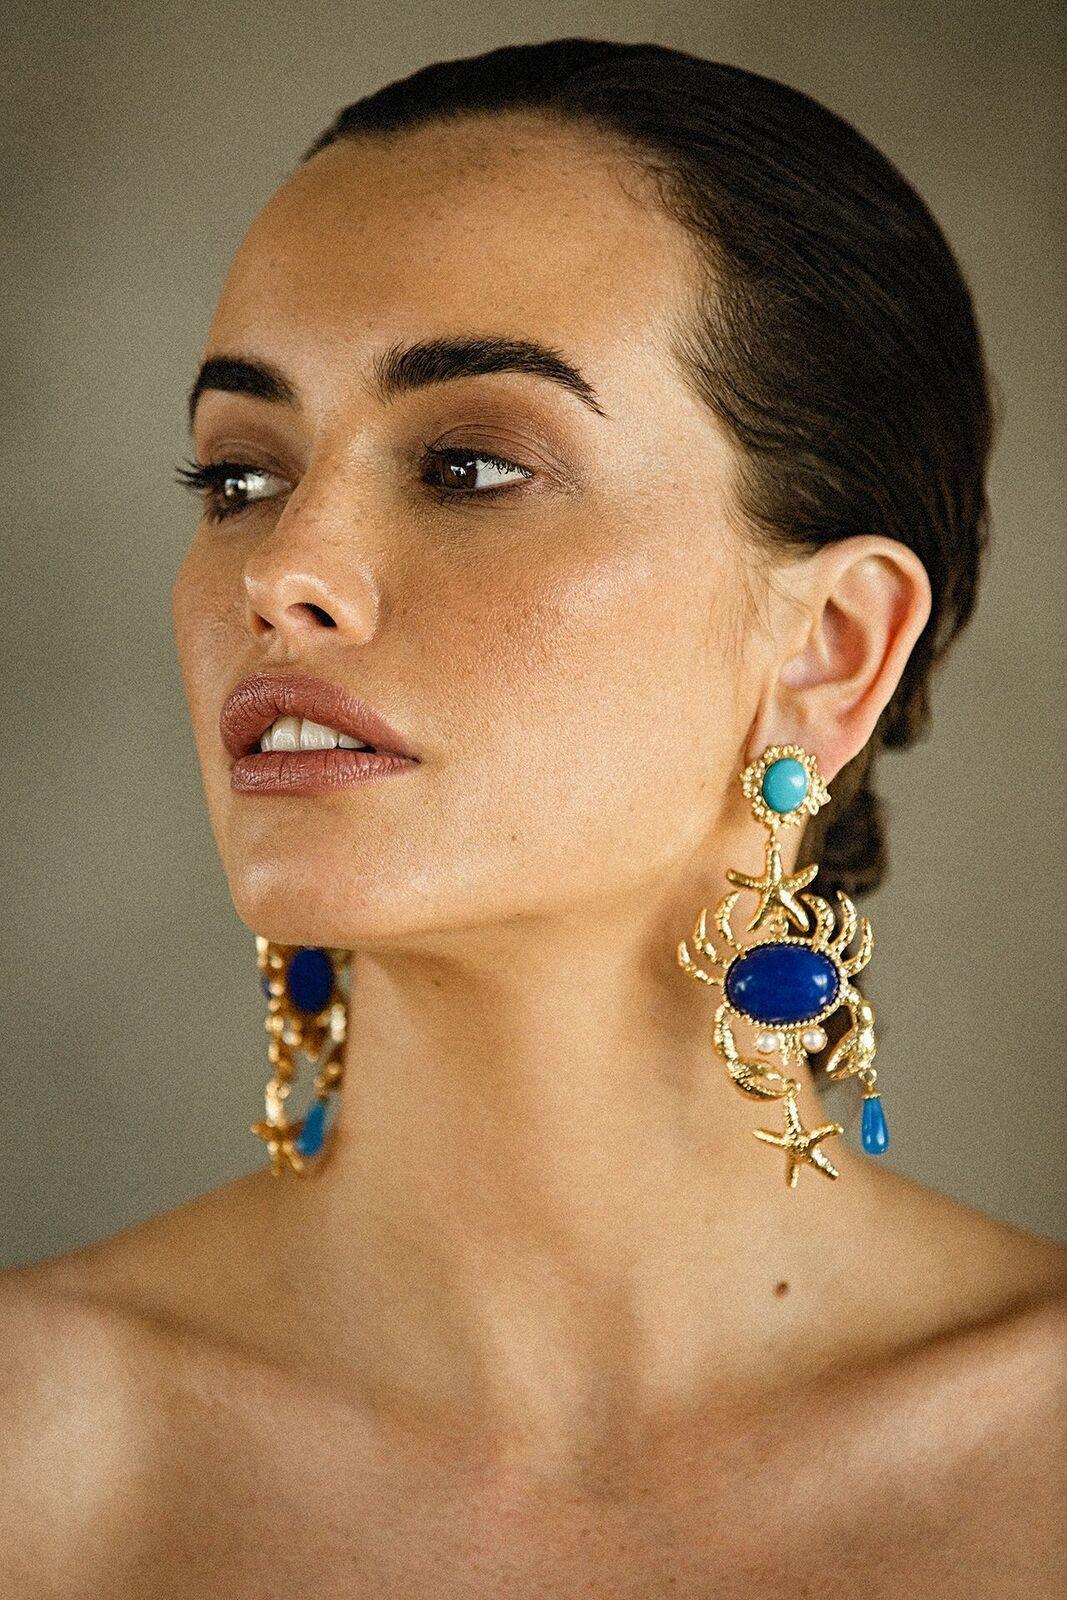 The Majolica Earrings are handcrafted in Europe. Created with 24k gold-plated brass, the Majolica Earrings are inspired the seaside of La Fontelina in Capri. With a uniquely creative design, these earrings are perfect for special occasions, bridal,